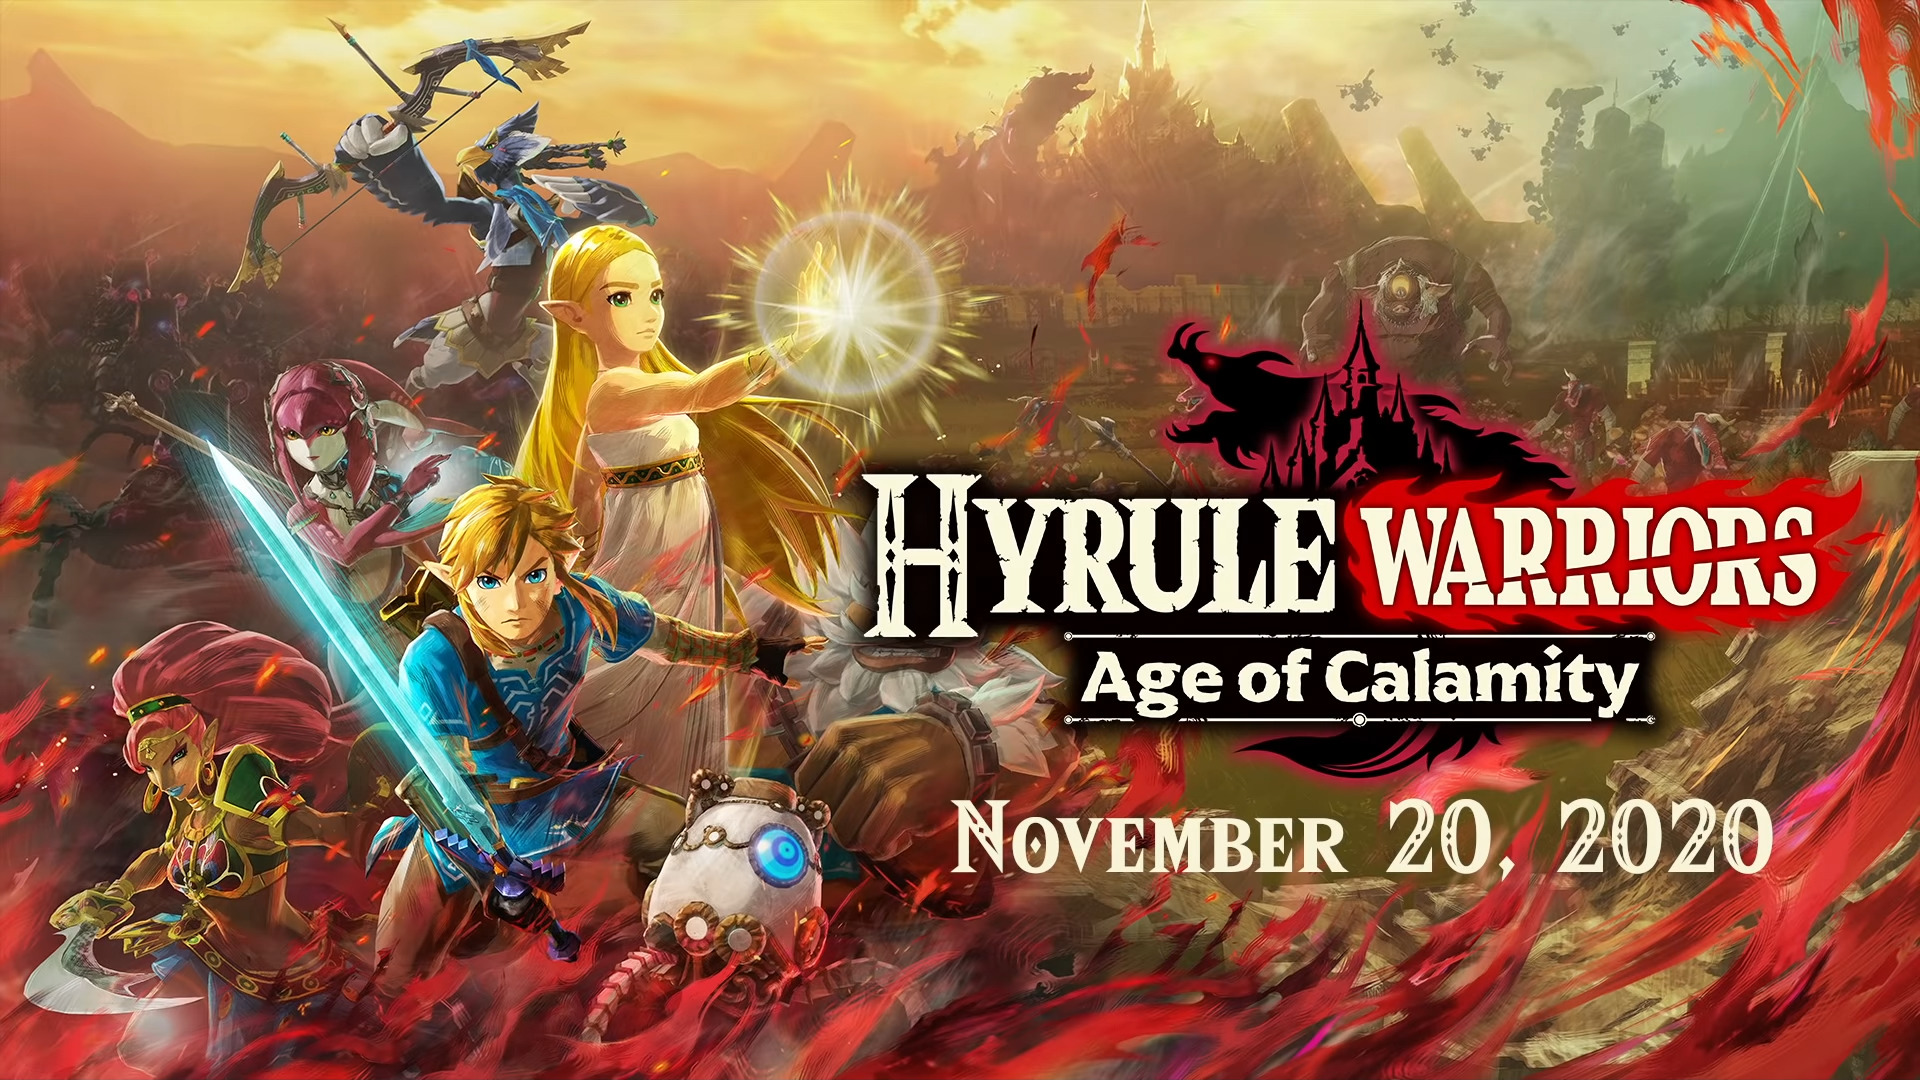 Nintendo Offers New Trailer Highlighting Abilities For Upcoming Hyrule Warriors: Age Of Calamity